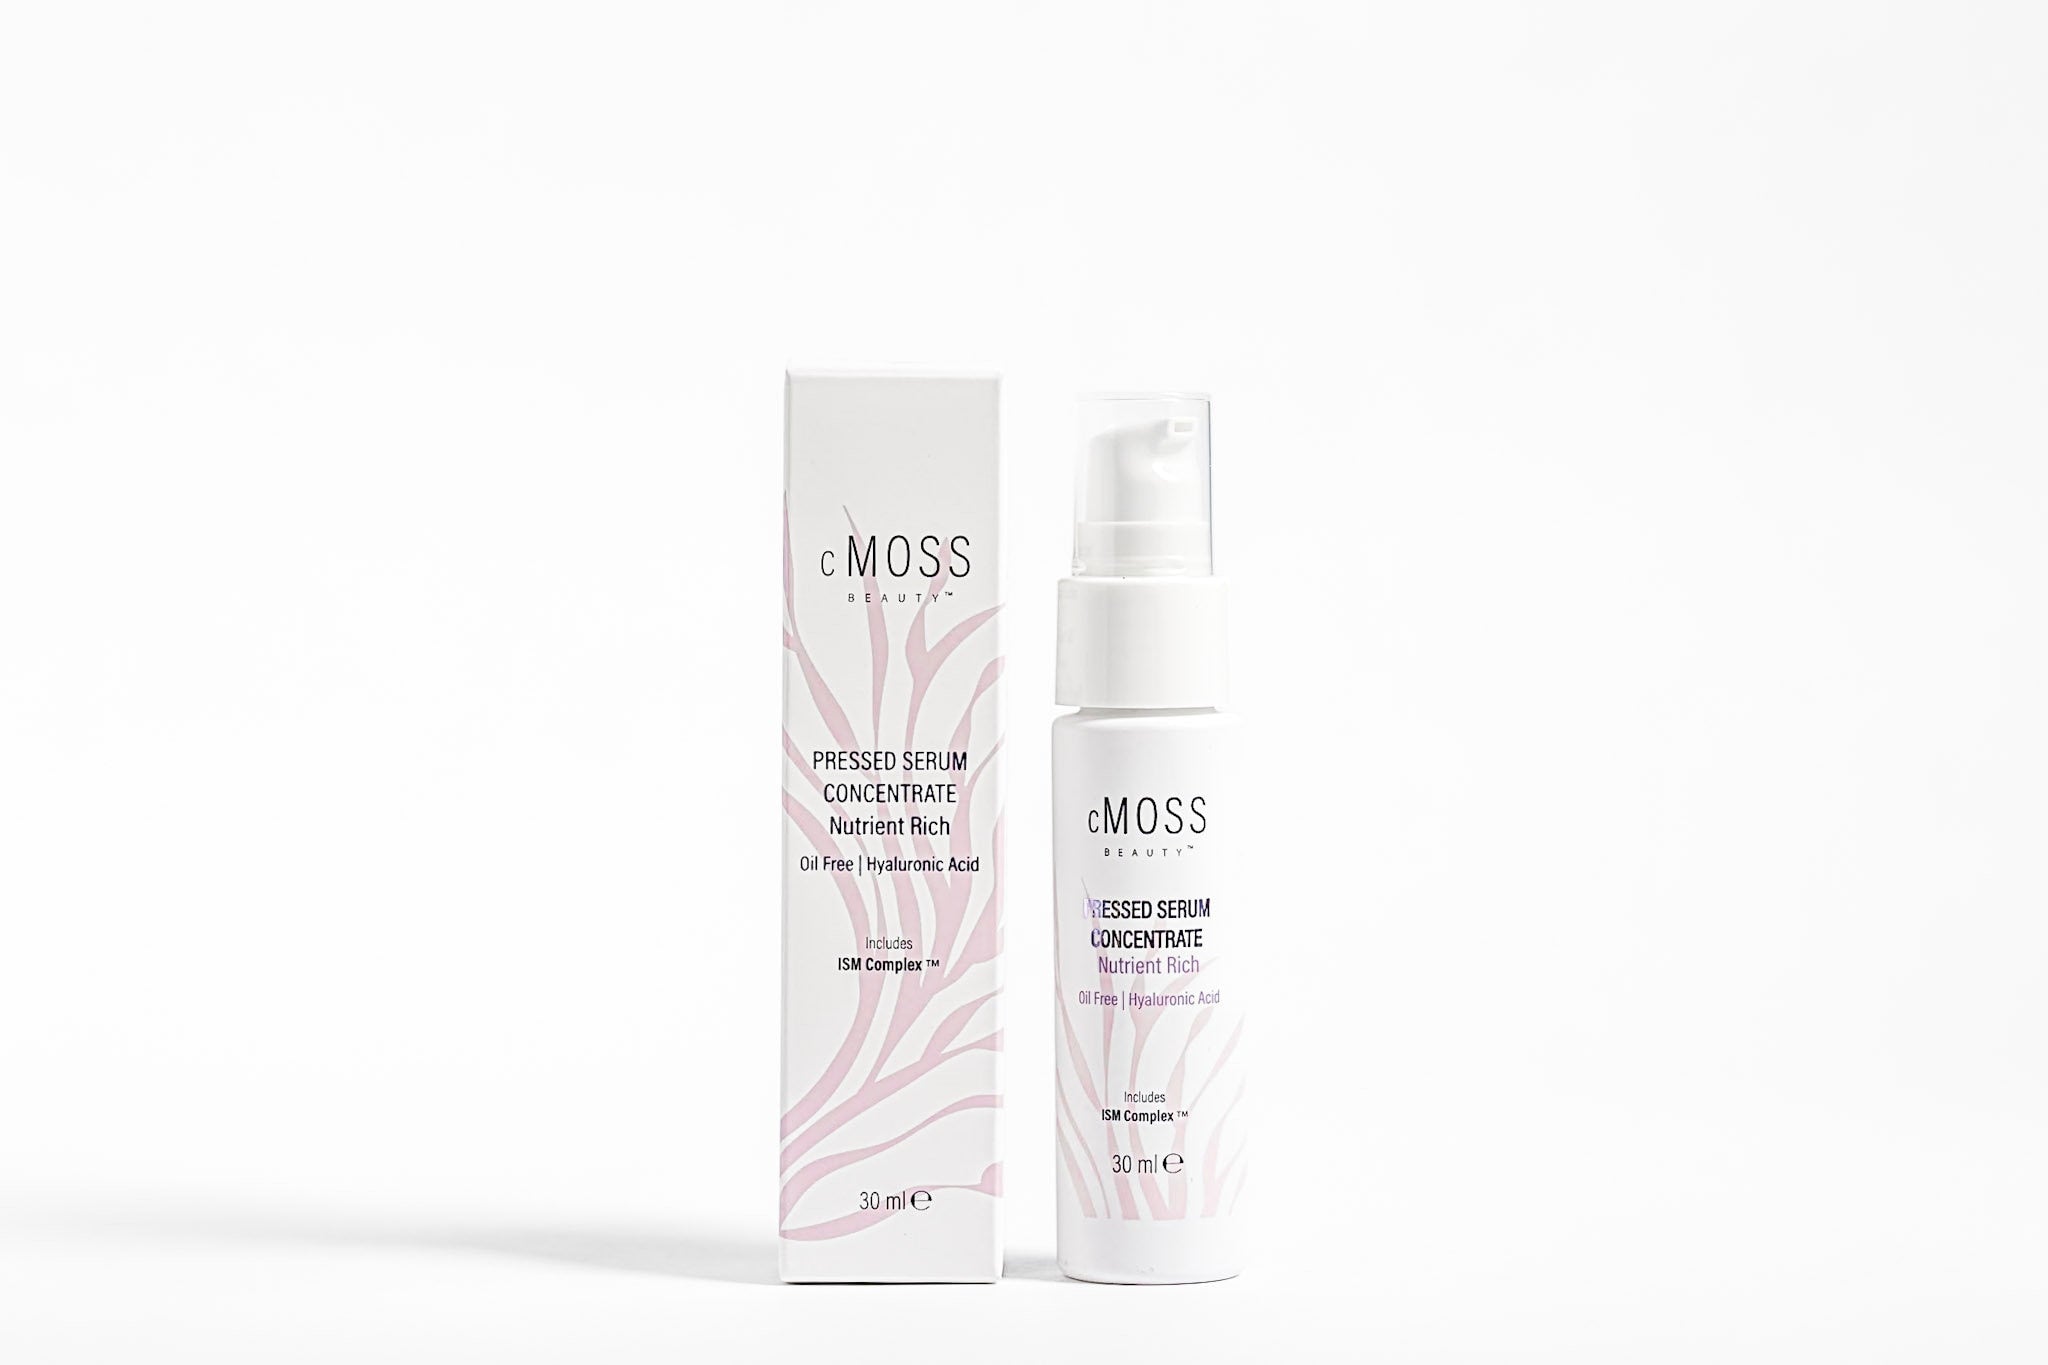 cMoss pressed serum concentrate next to box